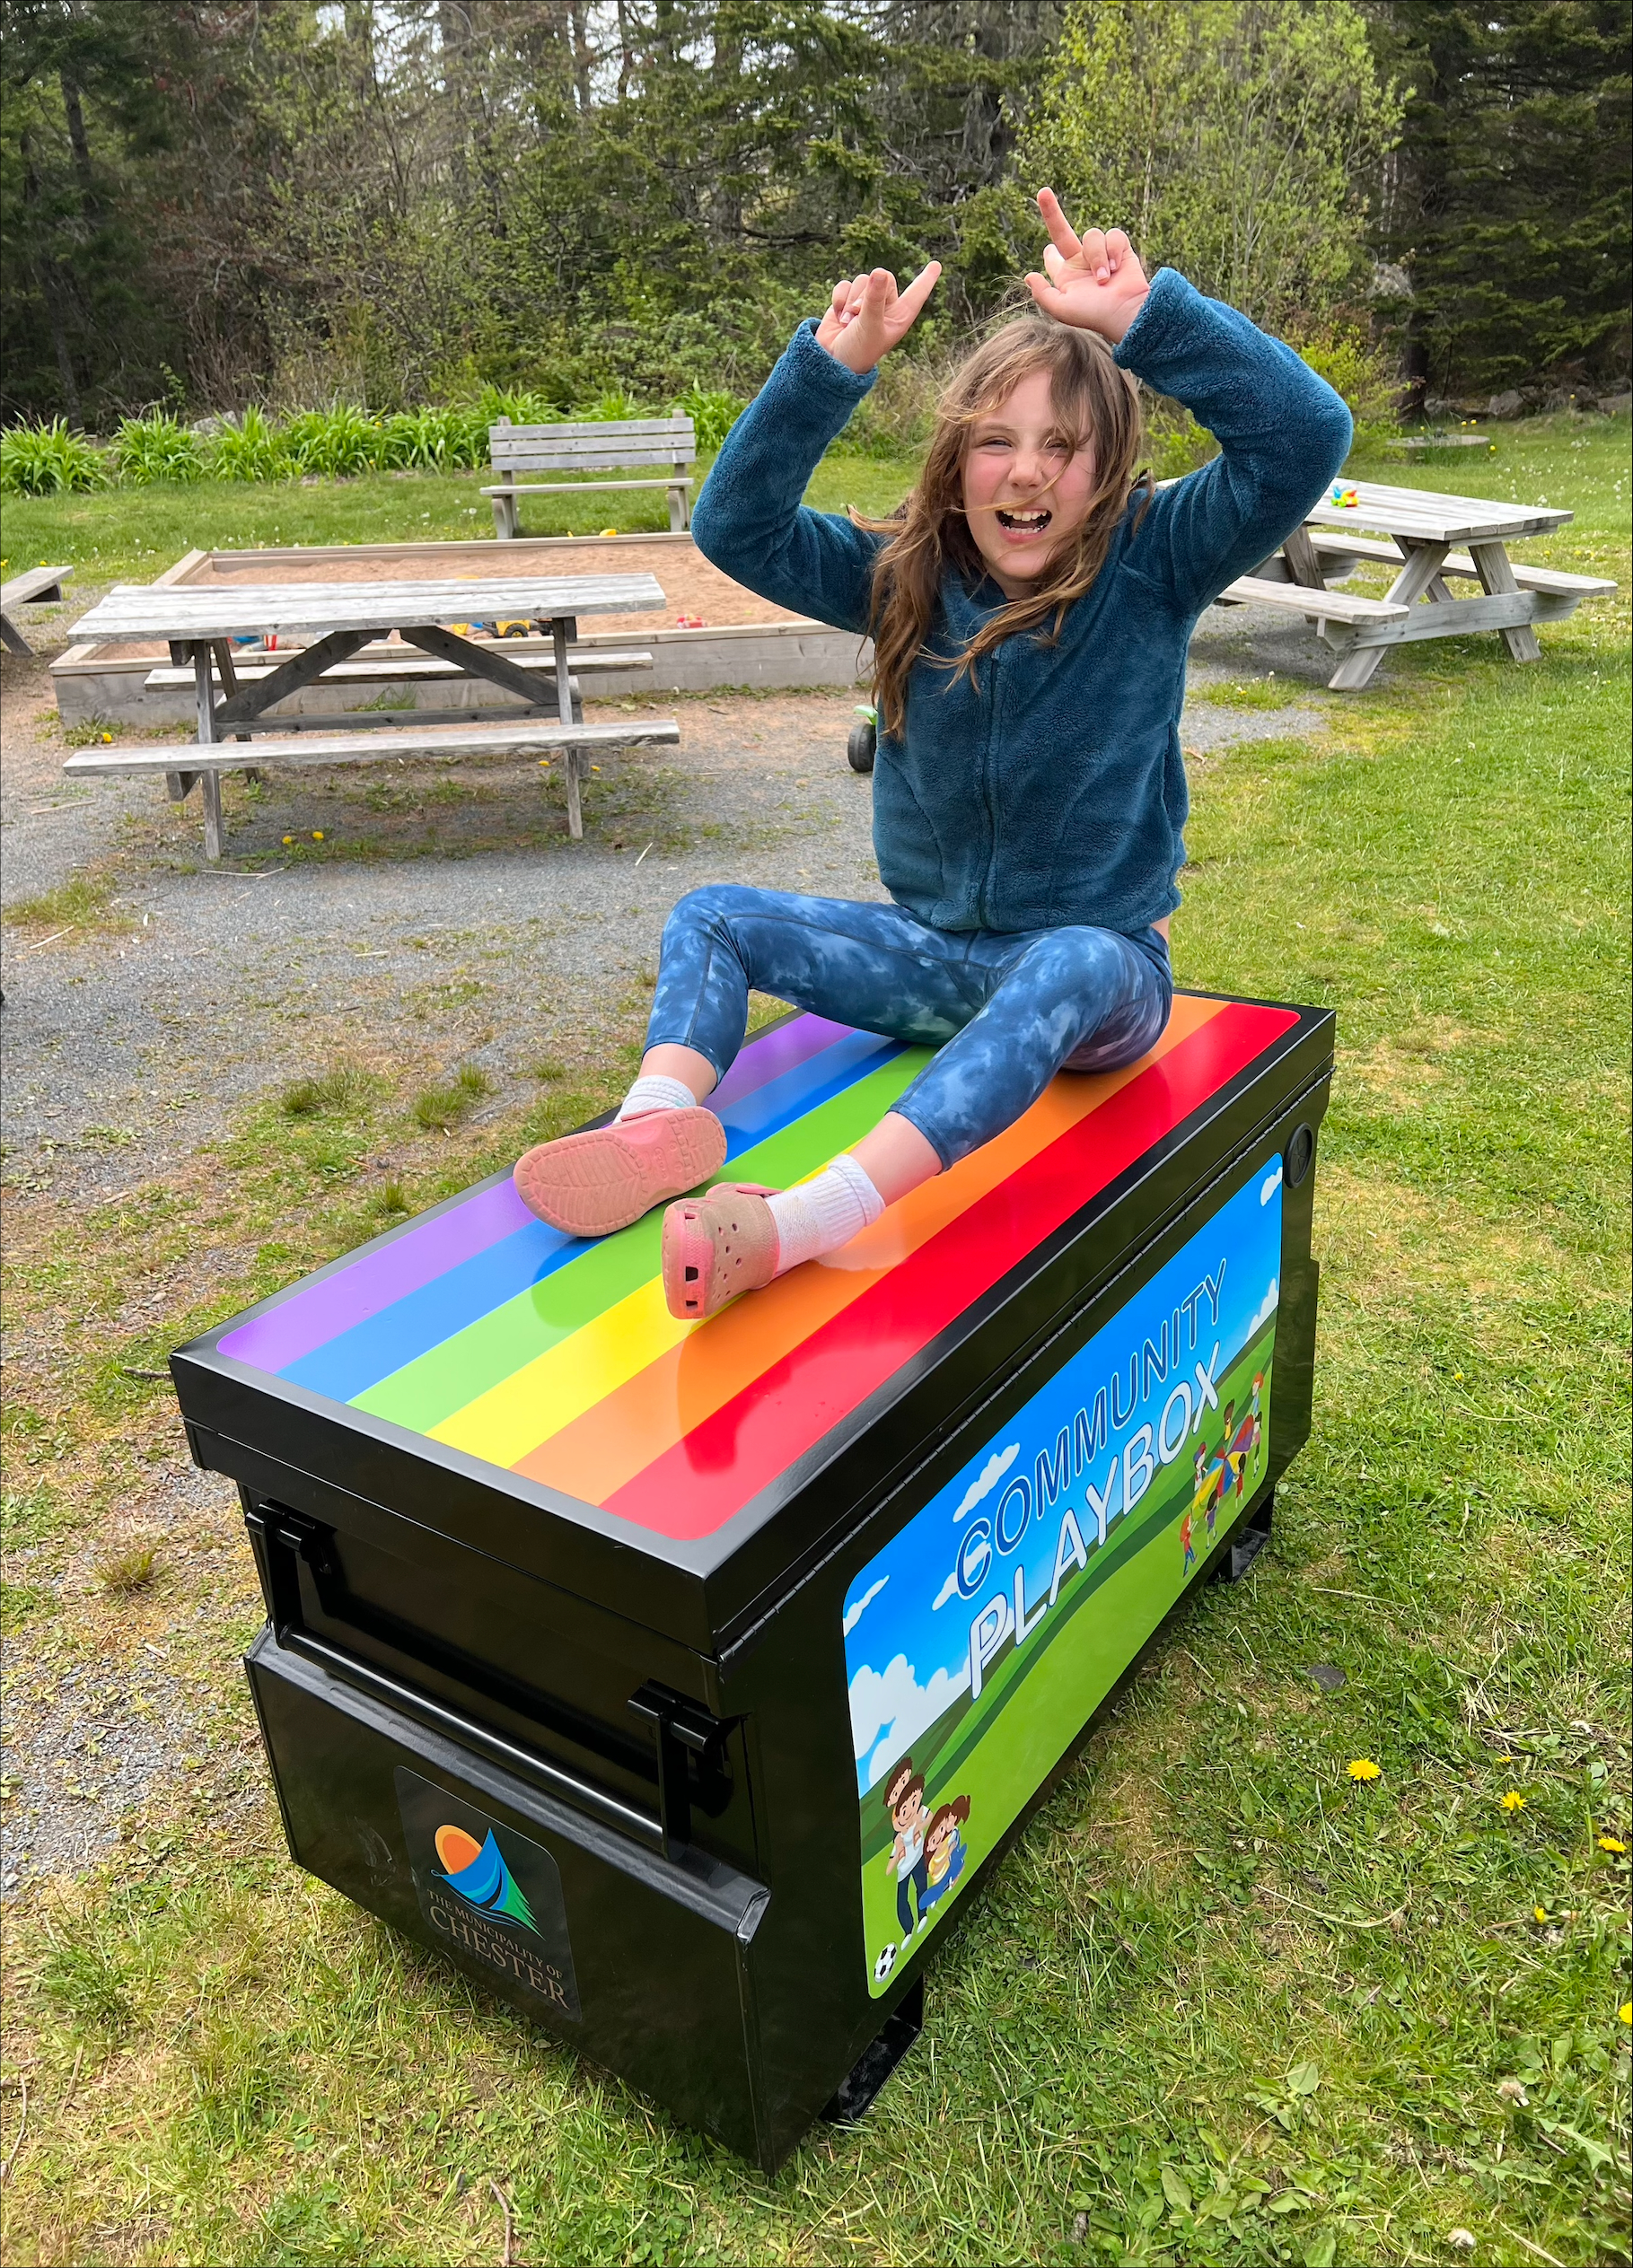 A young girl with hands in the air looking excited while sitting on a brightly colored steel Playbox with toys inside.